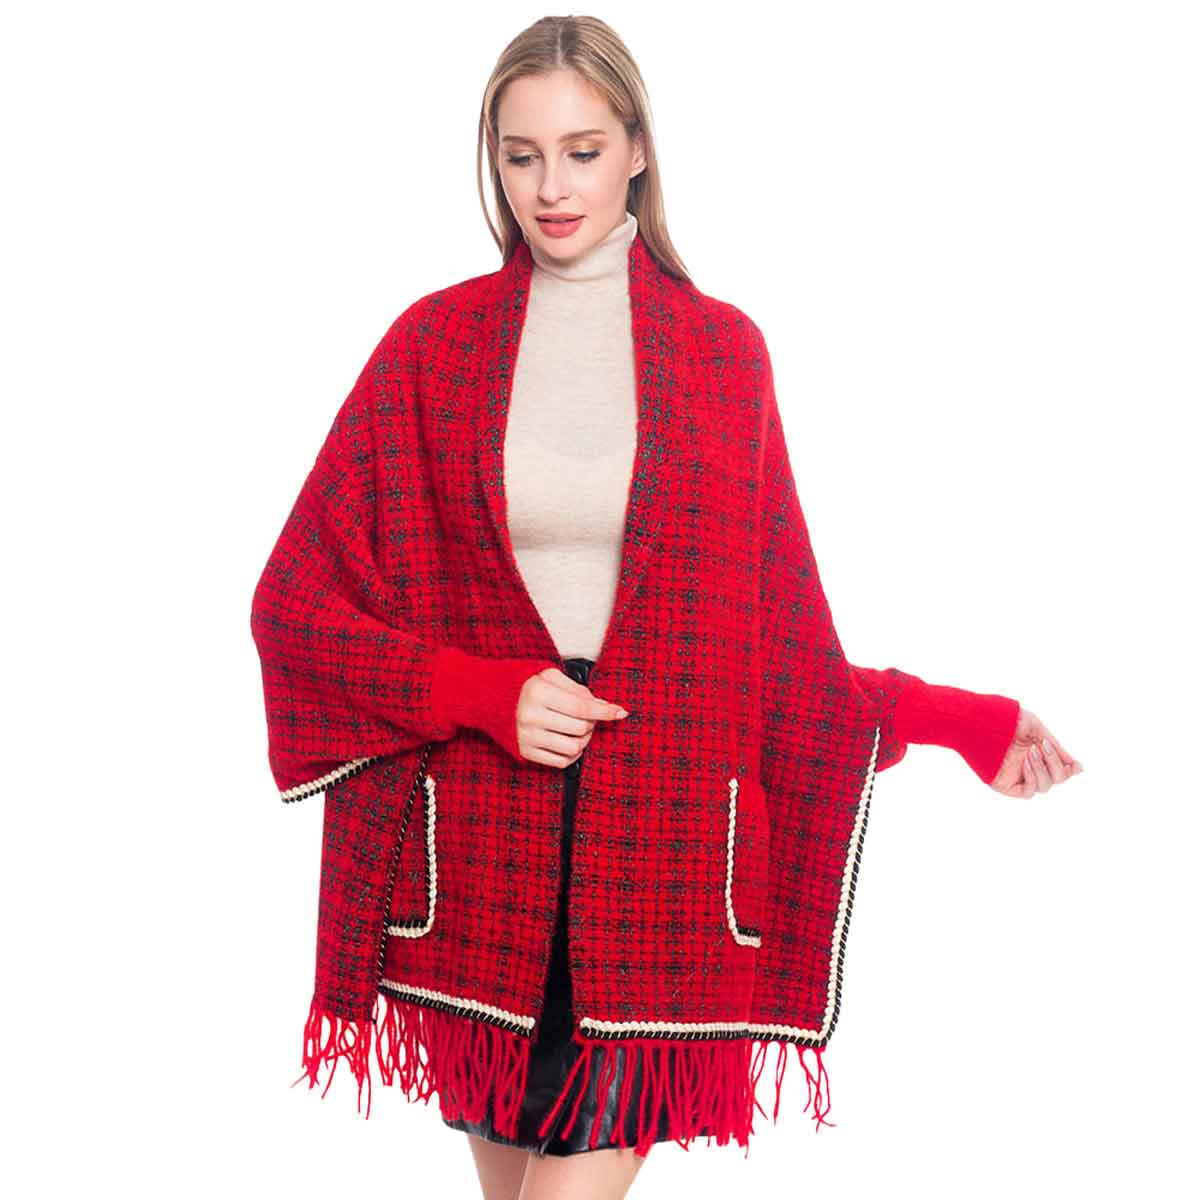 Red Plaid Check Patterned Poncho, is the perfect representation of beauty and comfortability for this winter. It will surely make you stand out with its beautiful color variation. It goes with every winter outfit and gives you a unique yet beautiful outlook everywhere. You can throw it on over so many pieces elevating any casual outfit! Perfect Gift for Wife, Mom, Birthday, Holiday, Christmas, Anniversary, Fun Night Out. Stay warm and toasty!